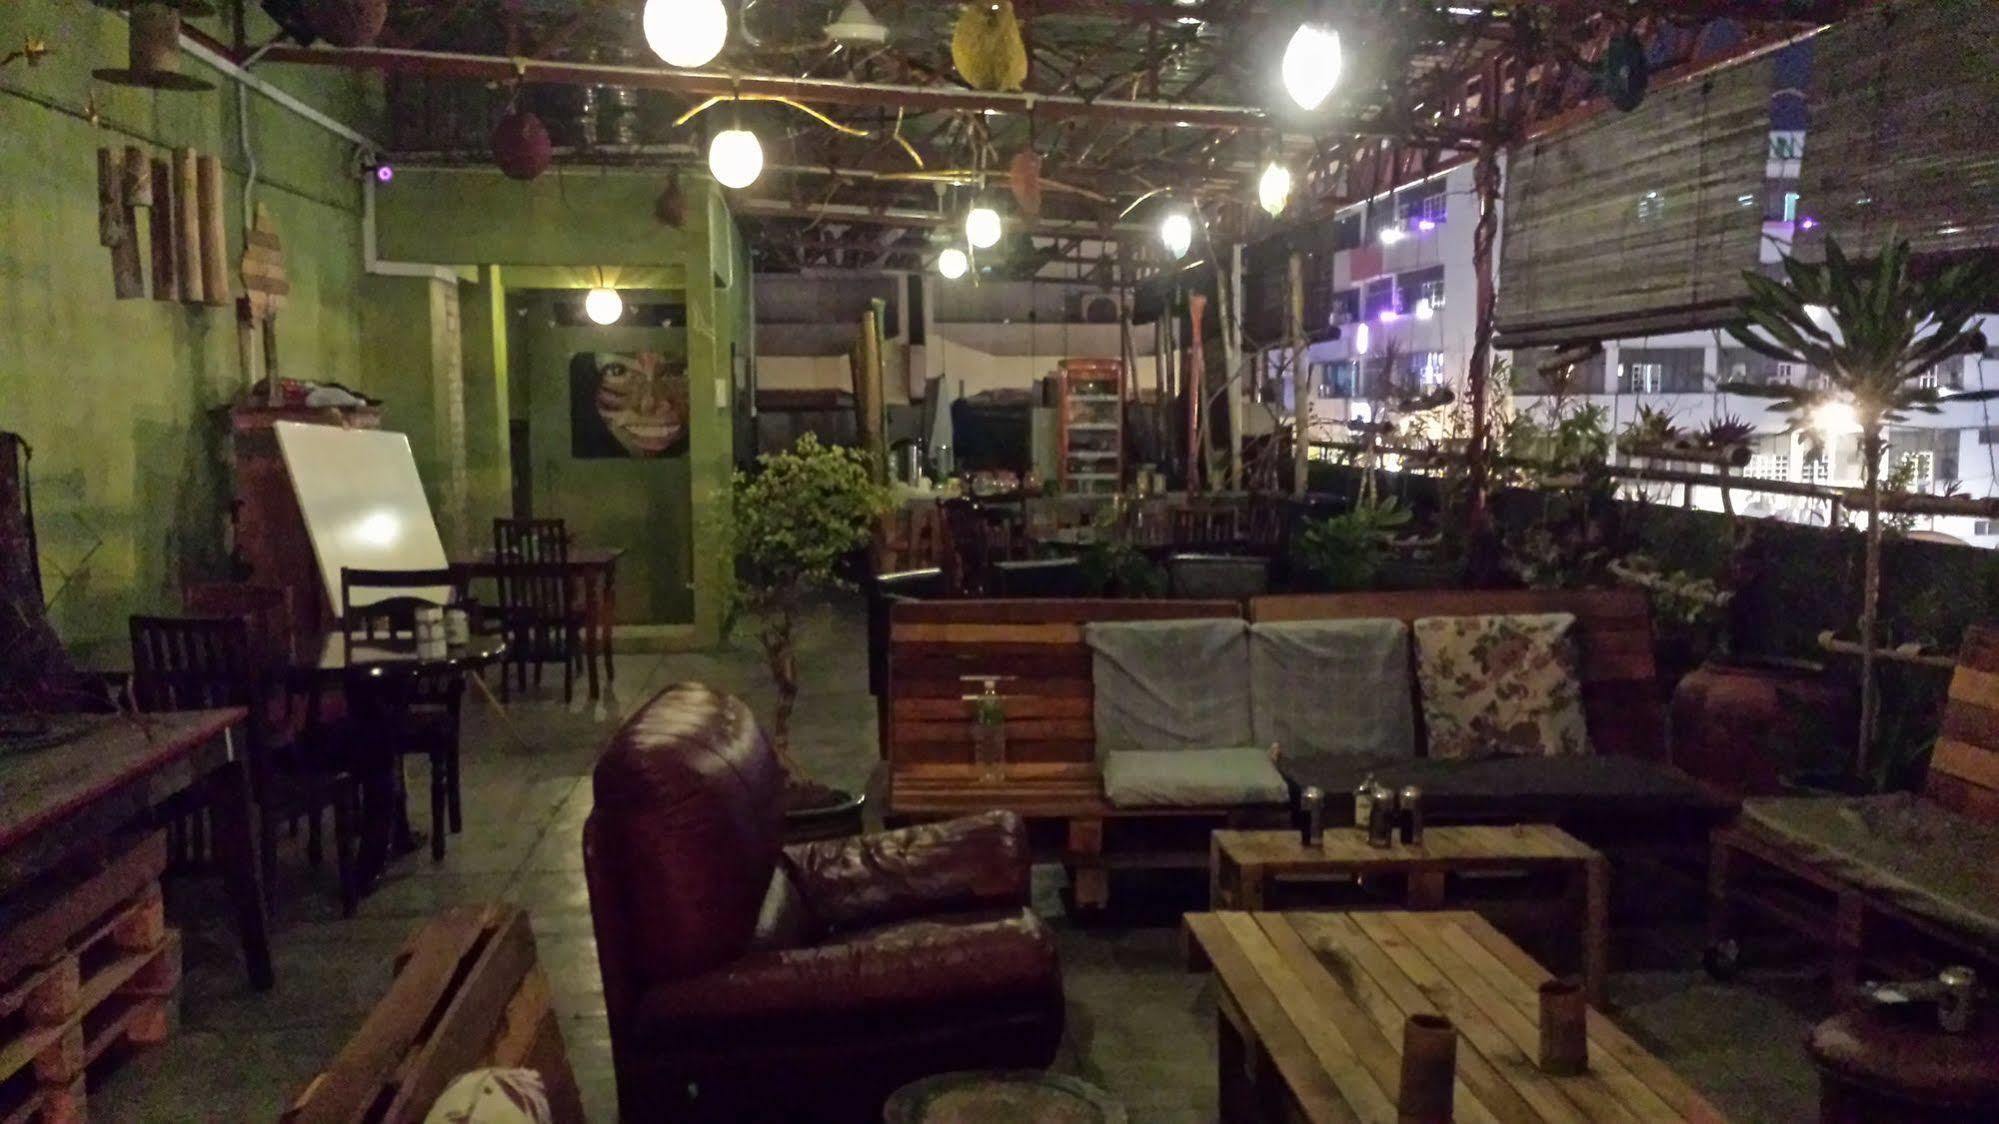 Birdnest Guesthouse, Gaia Rooftop Cafe 吉隆坡 外观 照片